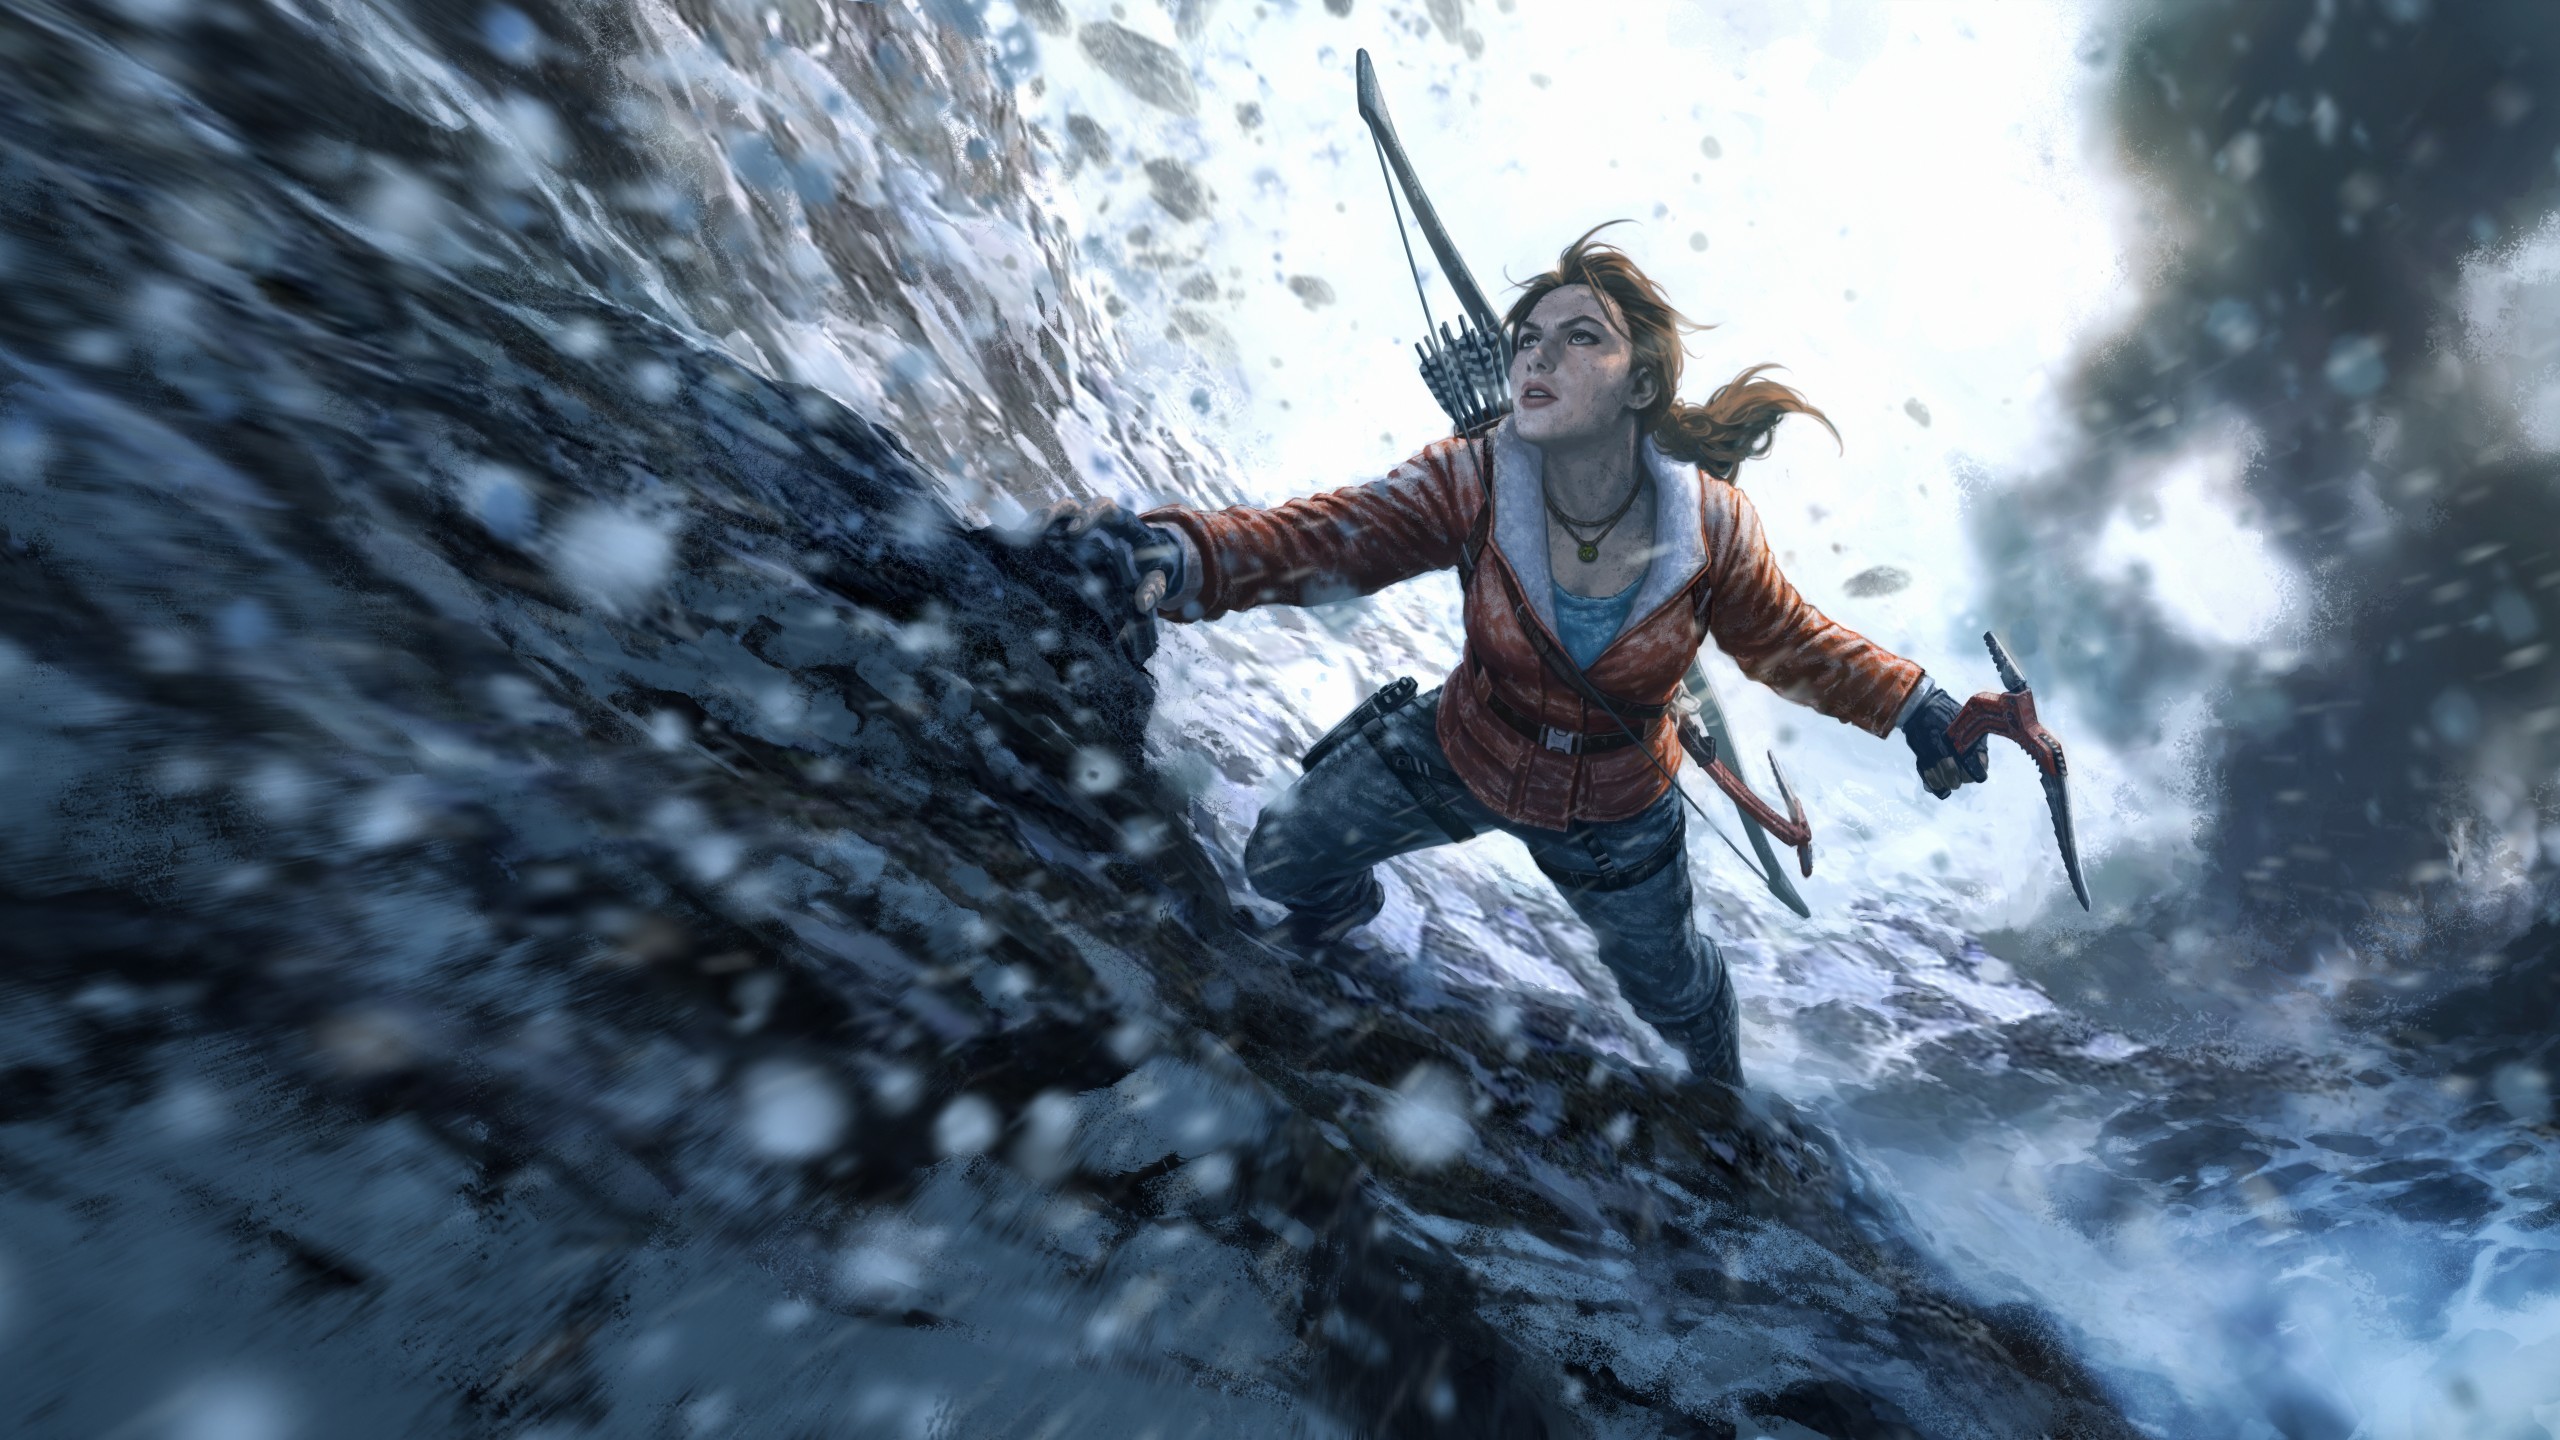 2560x1440 Tomb Raider Wallpaper For Iphone Is Cool Wallpapers